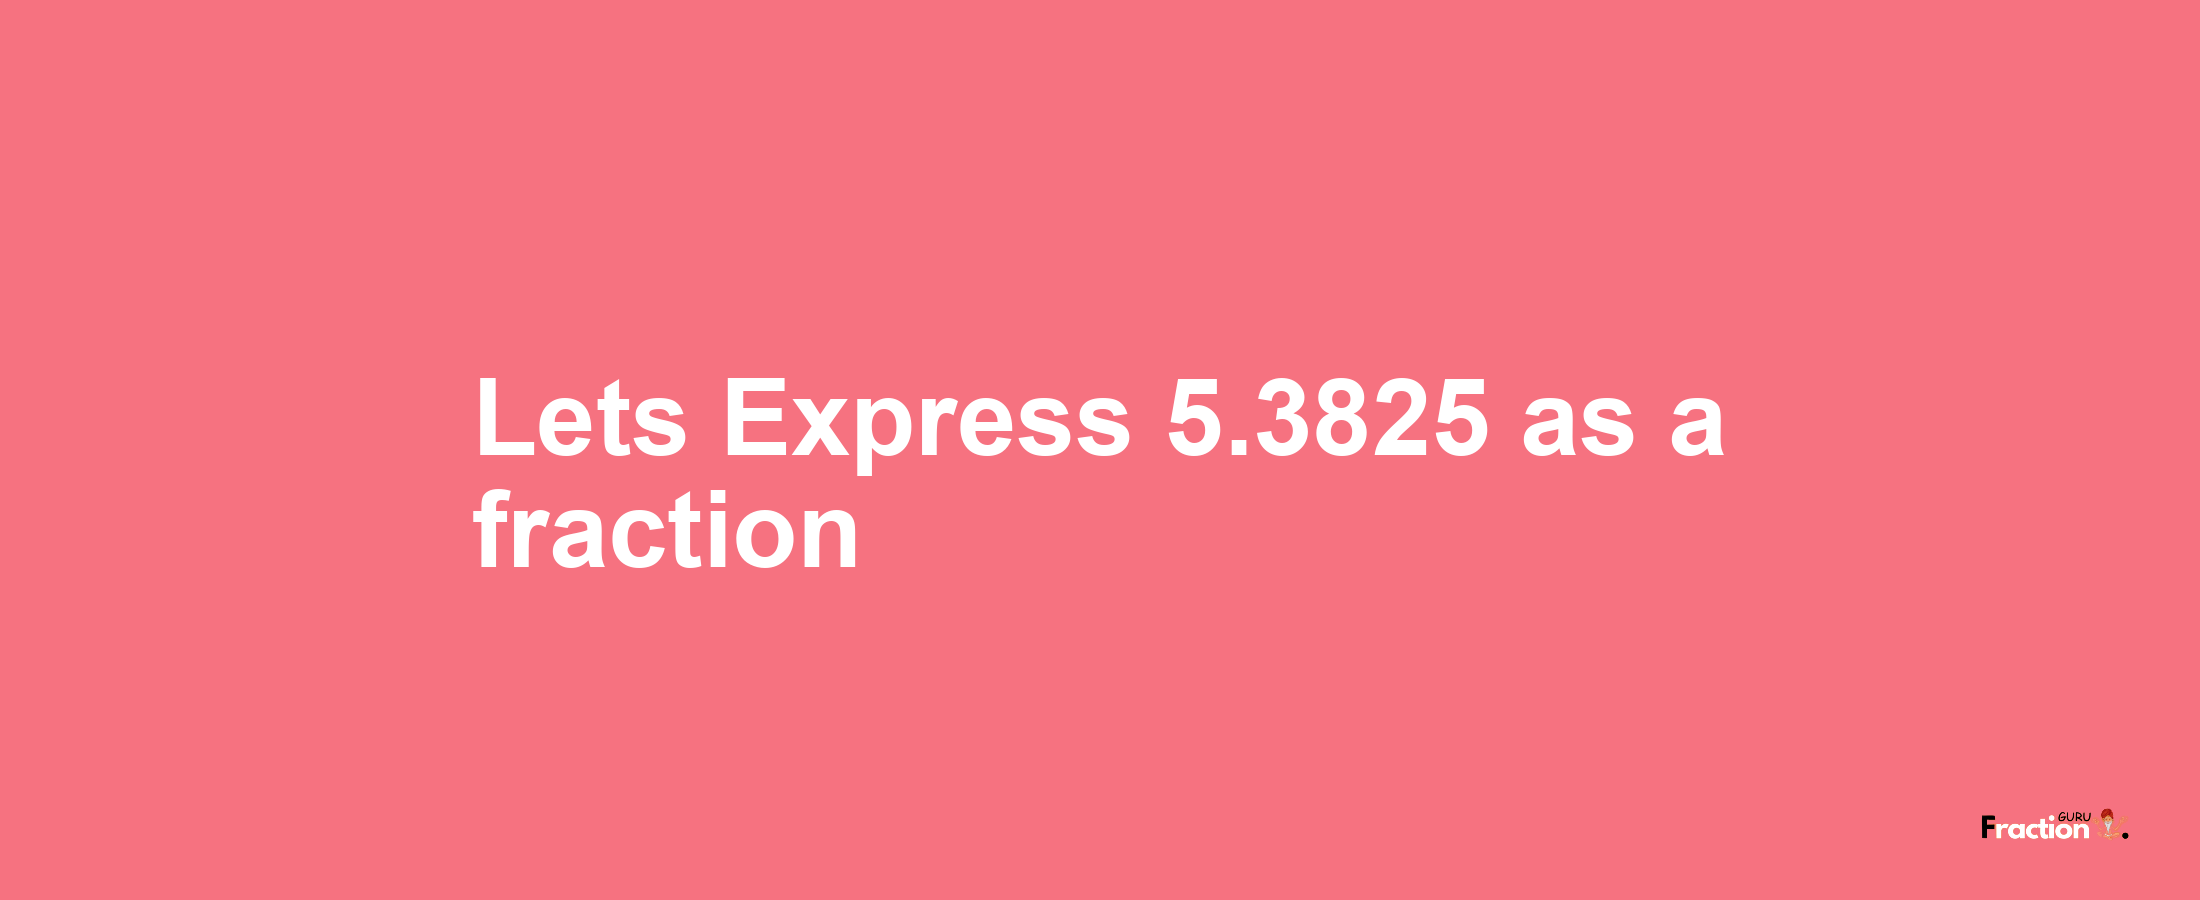 Lets Express 5.3825 as afraction